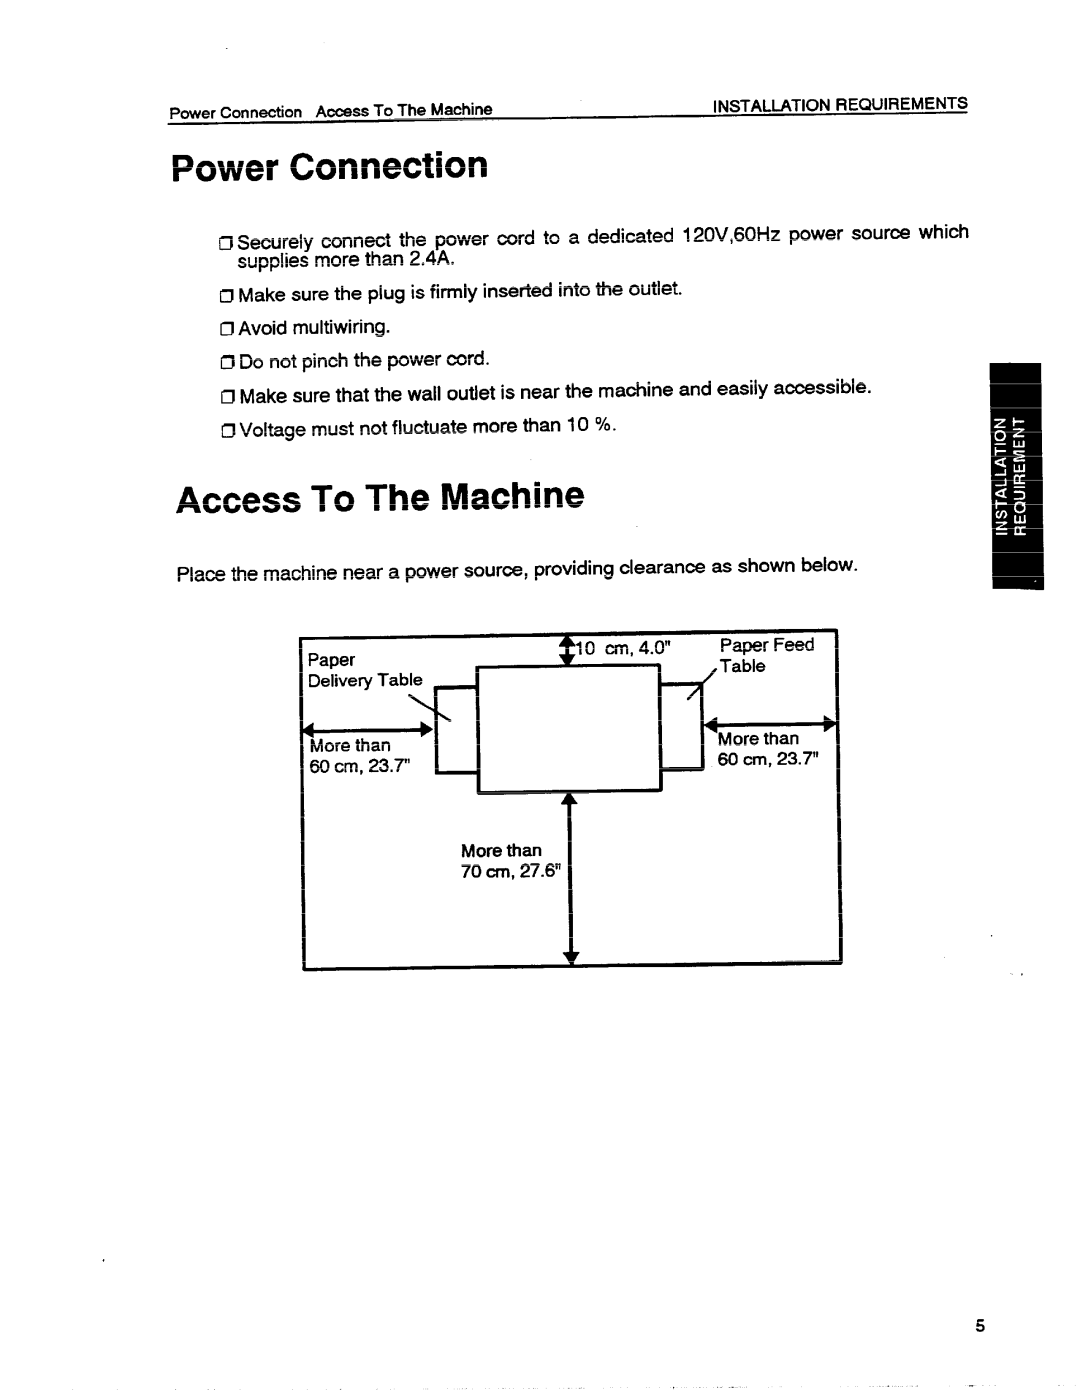 Ricoh VT1730 manual Power Connection, Access To The Machine 